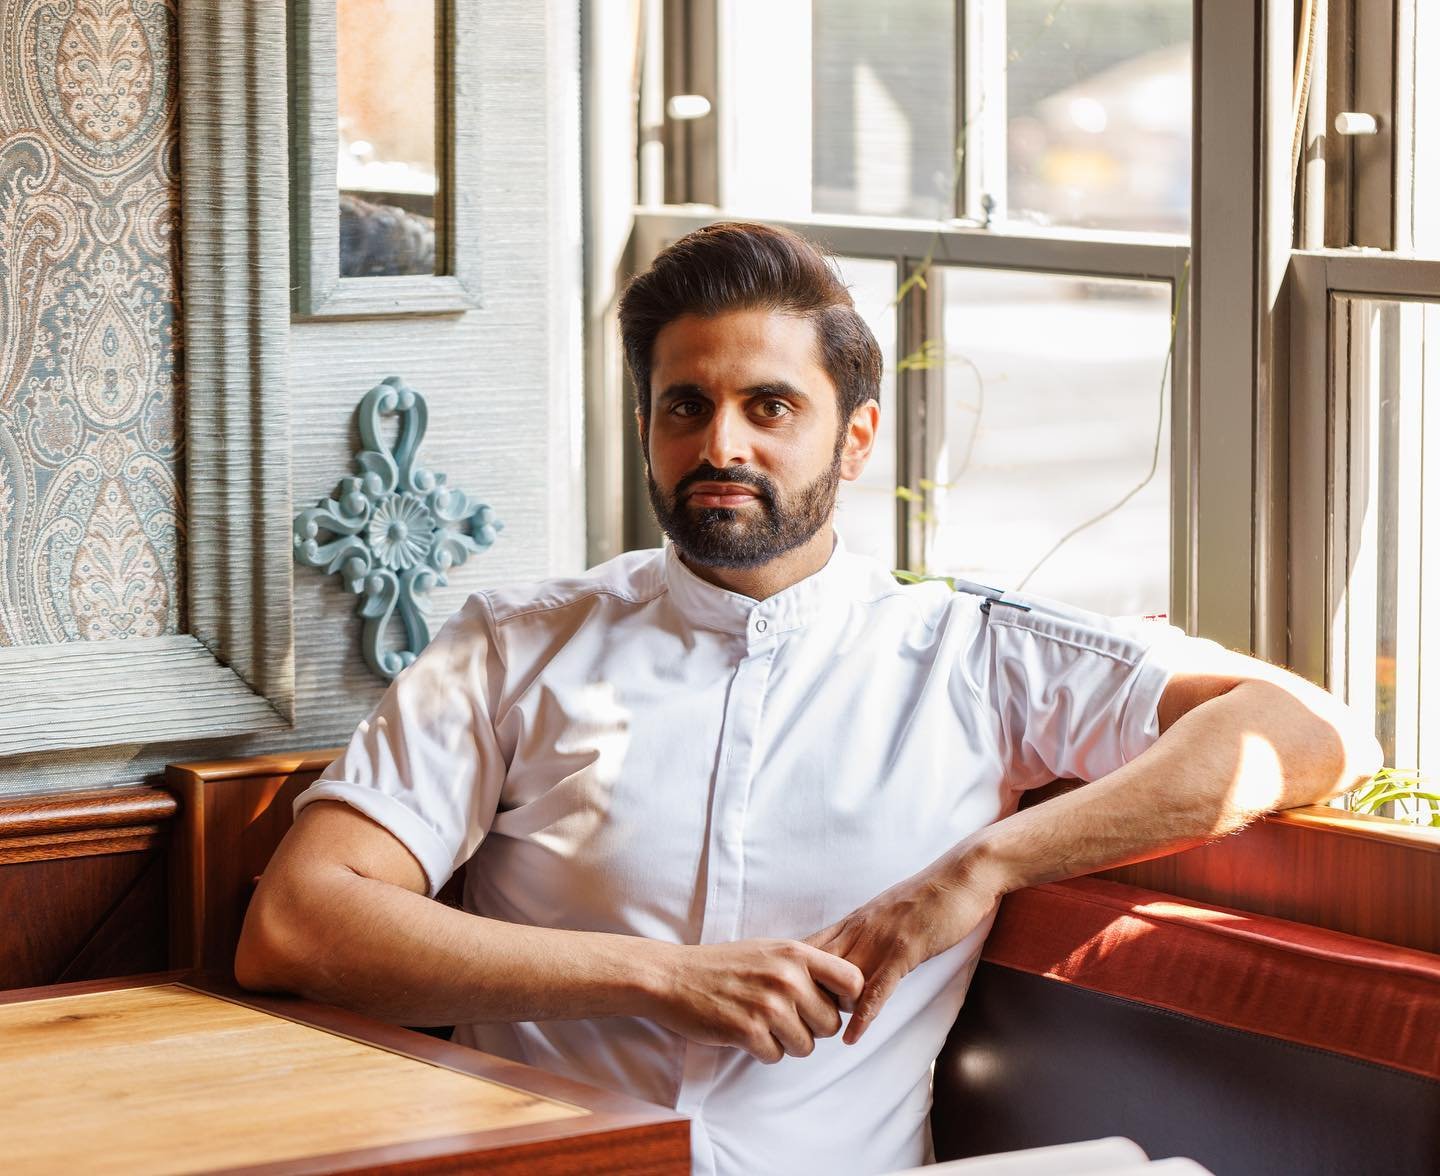 We are delighted to welcome Chef Chet Sharma of BiBi to the Lotus client list. 

BiBi is a South Asian word that formally means &lsquo;lady of the house&rsquo;, but Chef Chet Sharma has used its colloquial Urdu derivation meaning &lsquo;grandma&rsquo